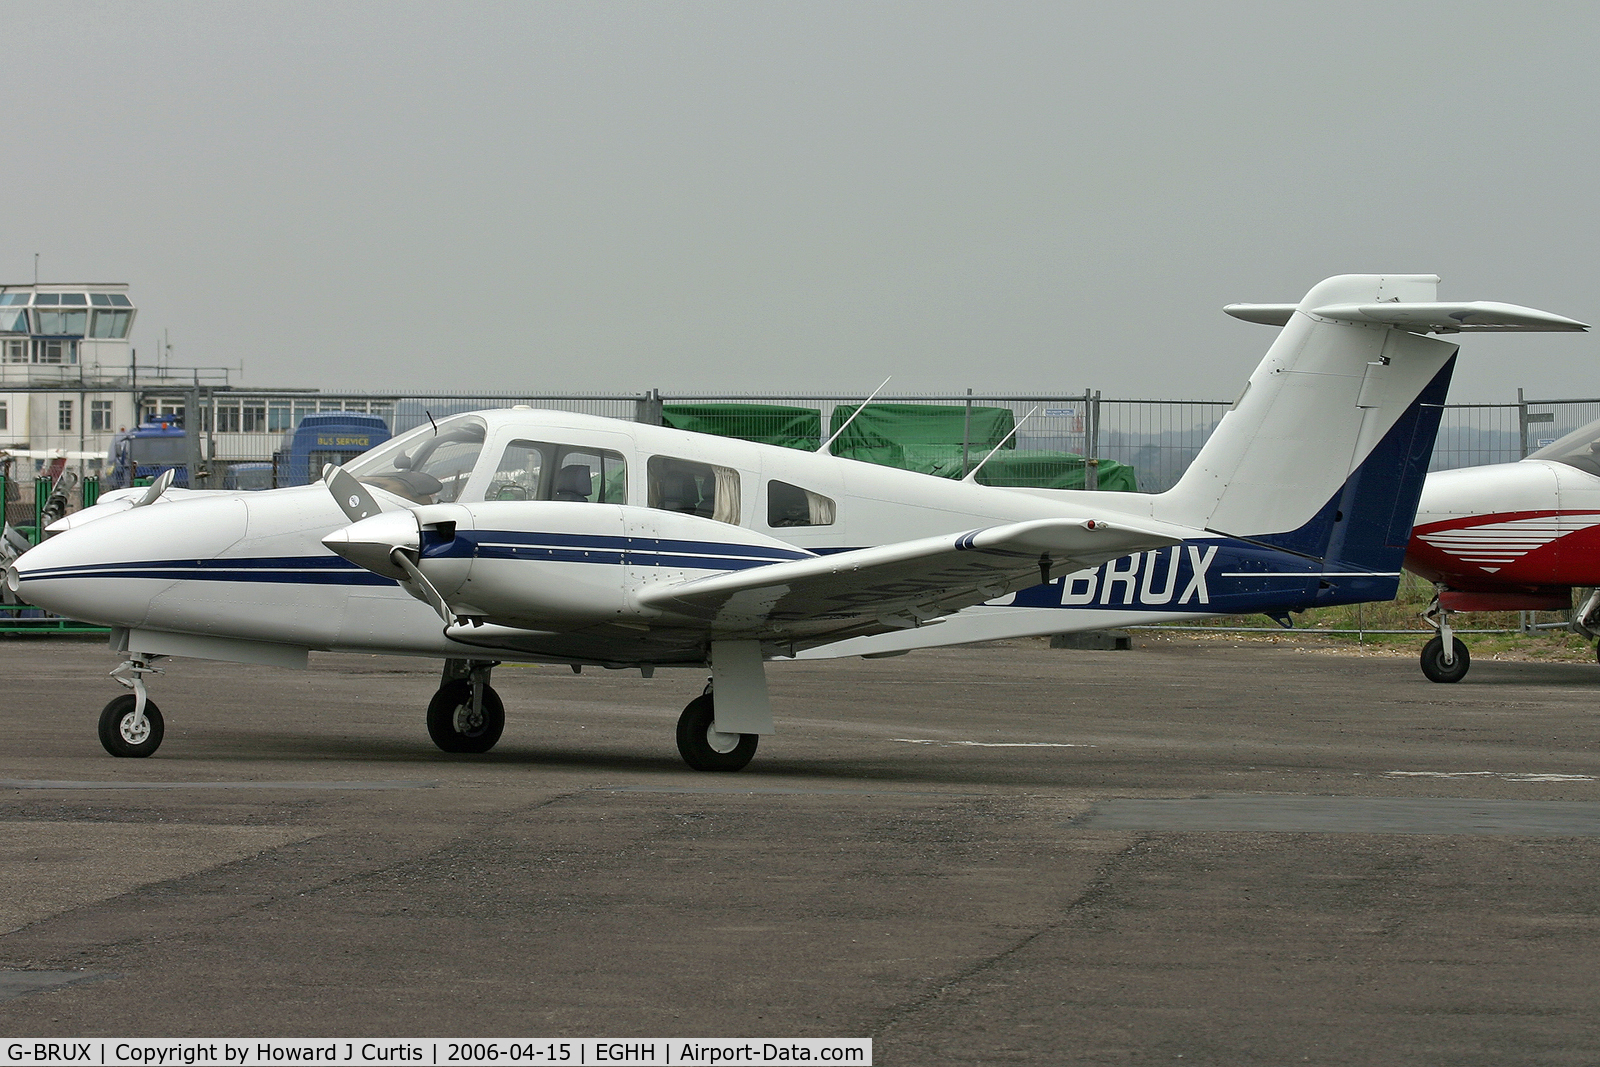 G-BRUX, 1978 Piper PA-44-180 Seminole C/N 44-7995151, Privately owned.